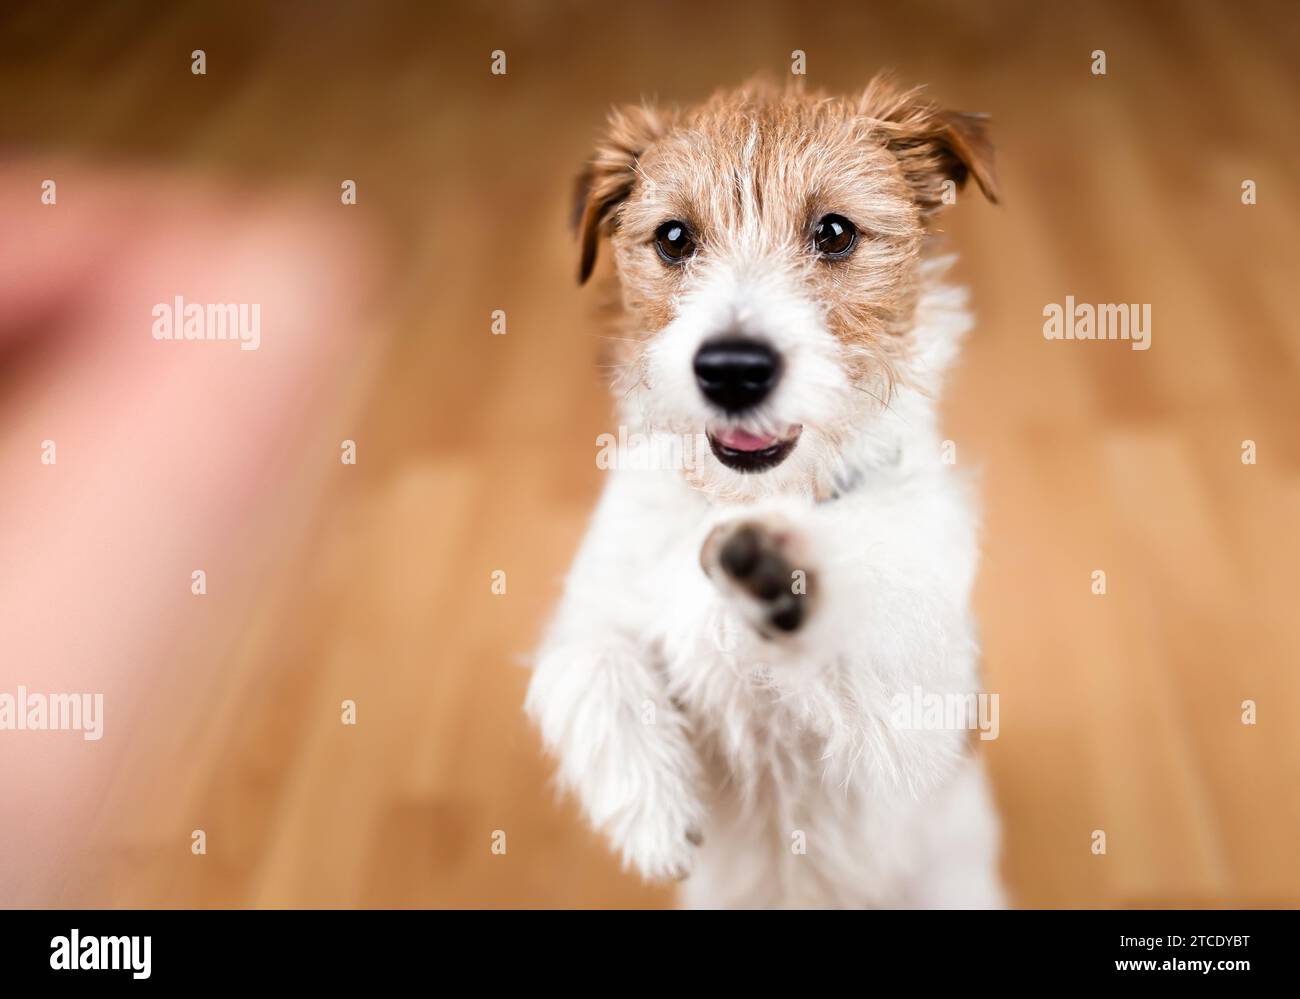 Cute dog puppy begging for snack food and giving paw. Puppy training background. Friendship, relationship of owner and pet. Stock Photo